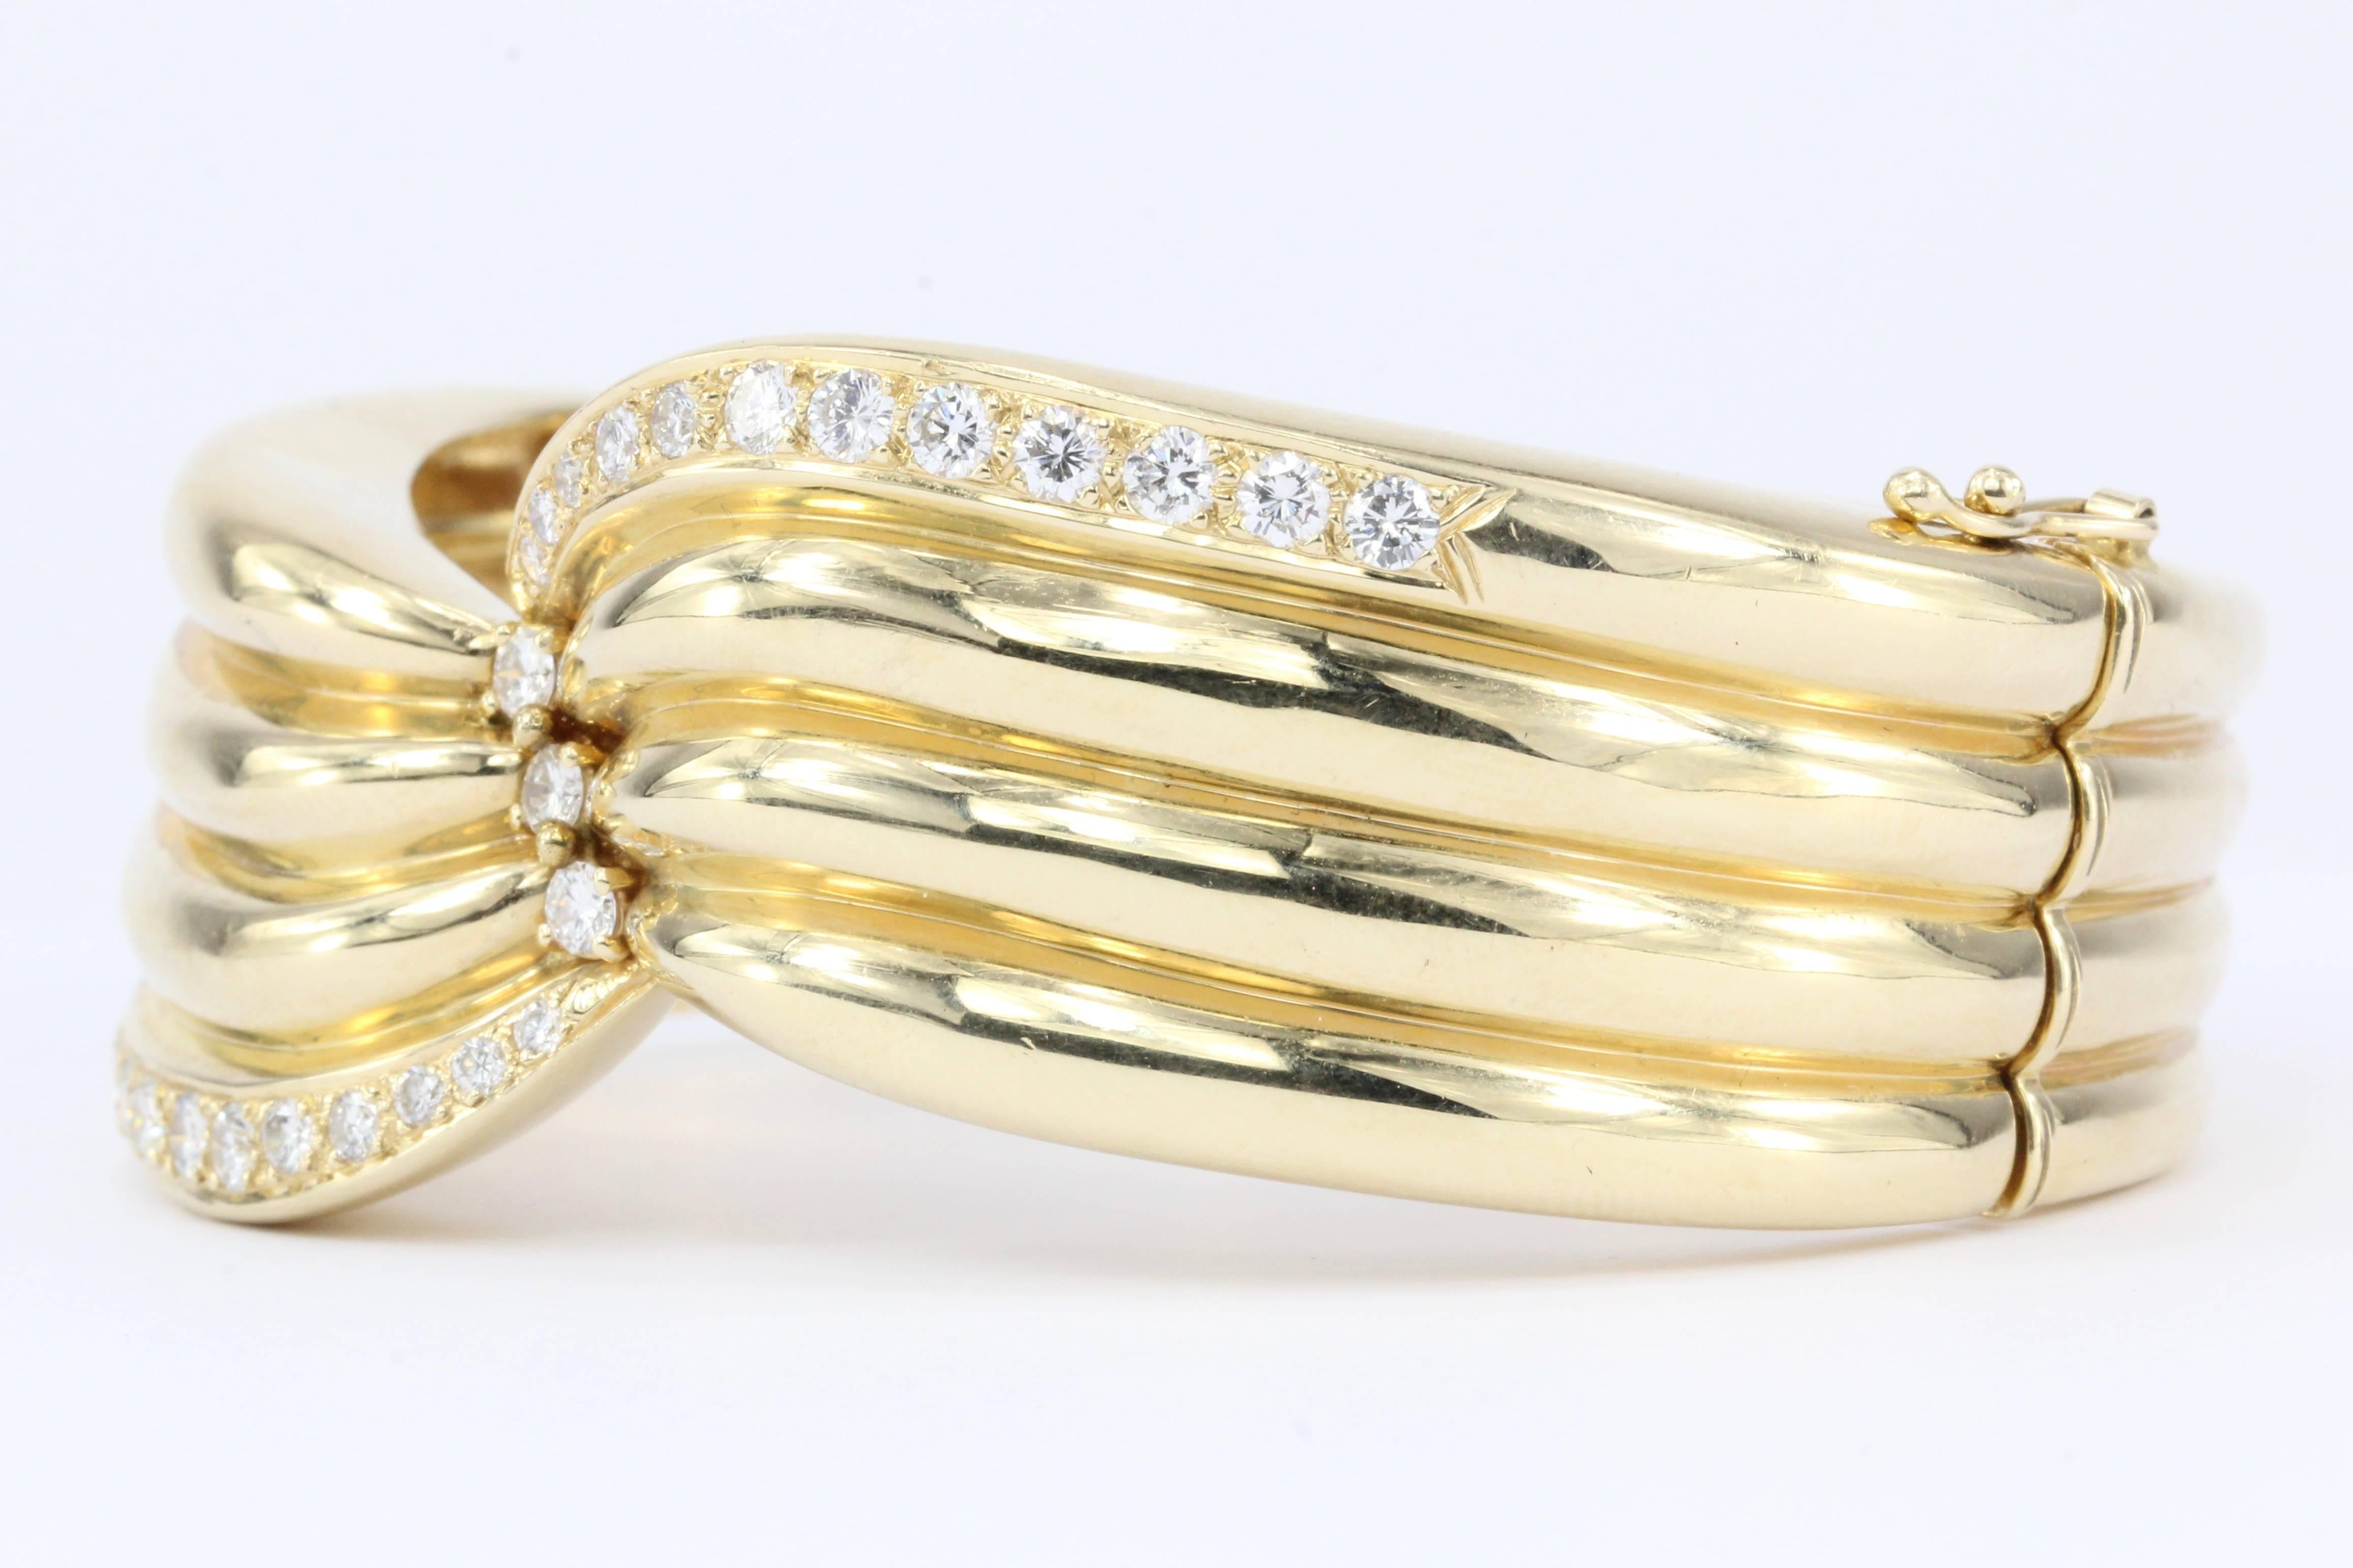 Era: Retro 

Composition: 14K Yellow Gold

Primary Stone: Diamond

Color: F/G

Clarity: Vs1/2

Bracelet Measurements: 8" Outer Circumference 7" Inner Circumference/ 1" wide

Bracelet Weight: 59.8 grams

Condition: Excellent estate